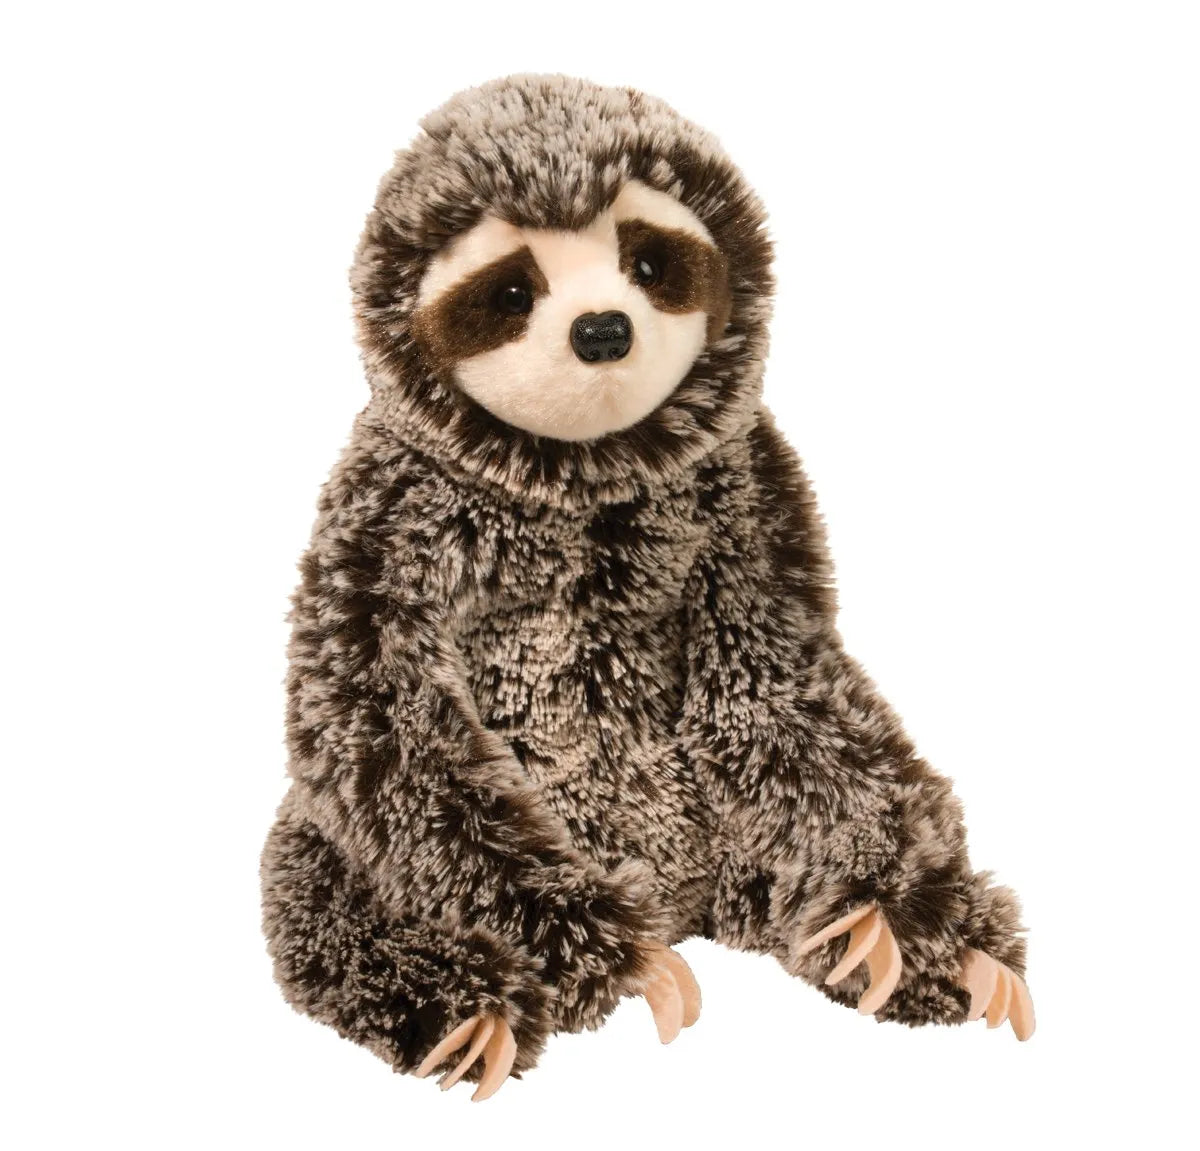 Buy Slowpoke Sloth Online With Canadian Pricing - Urban Nature Store